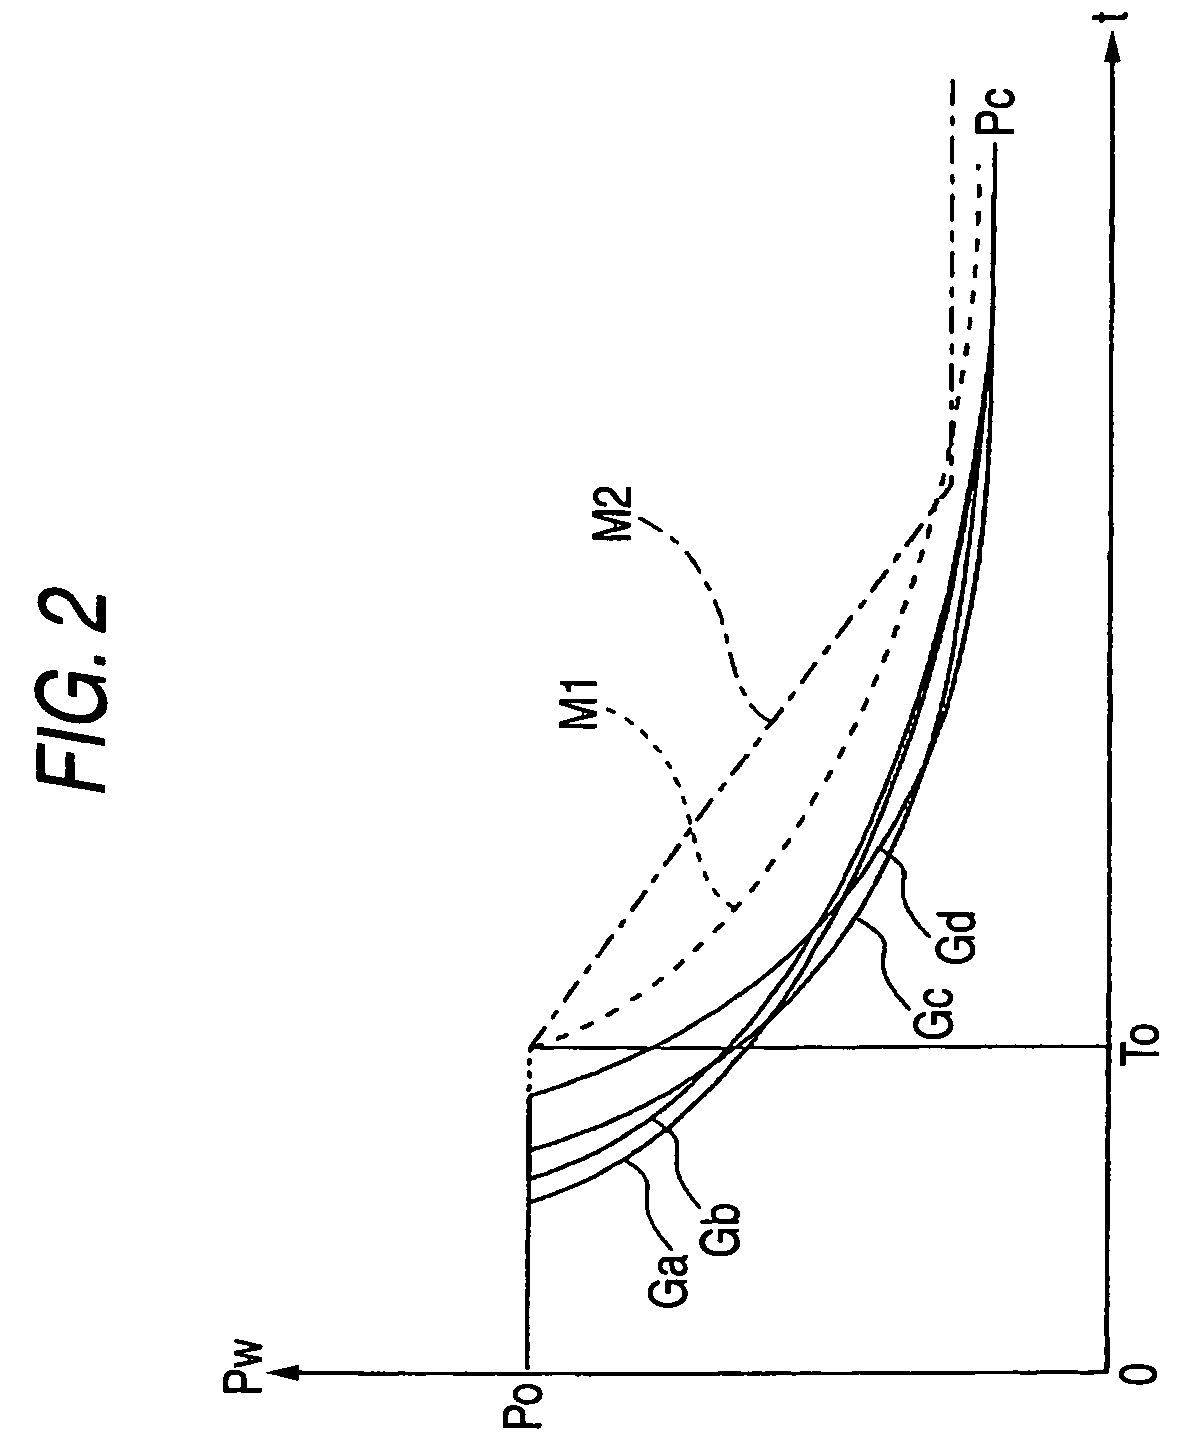 Lighting apparatus for discharge lamp